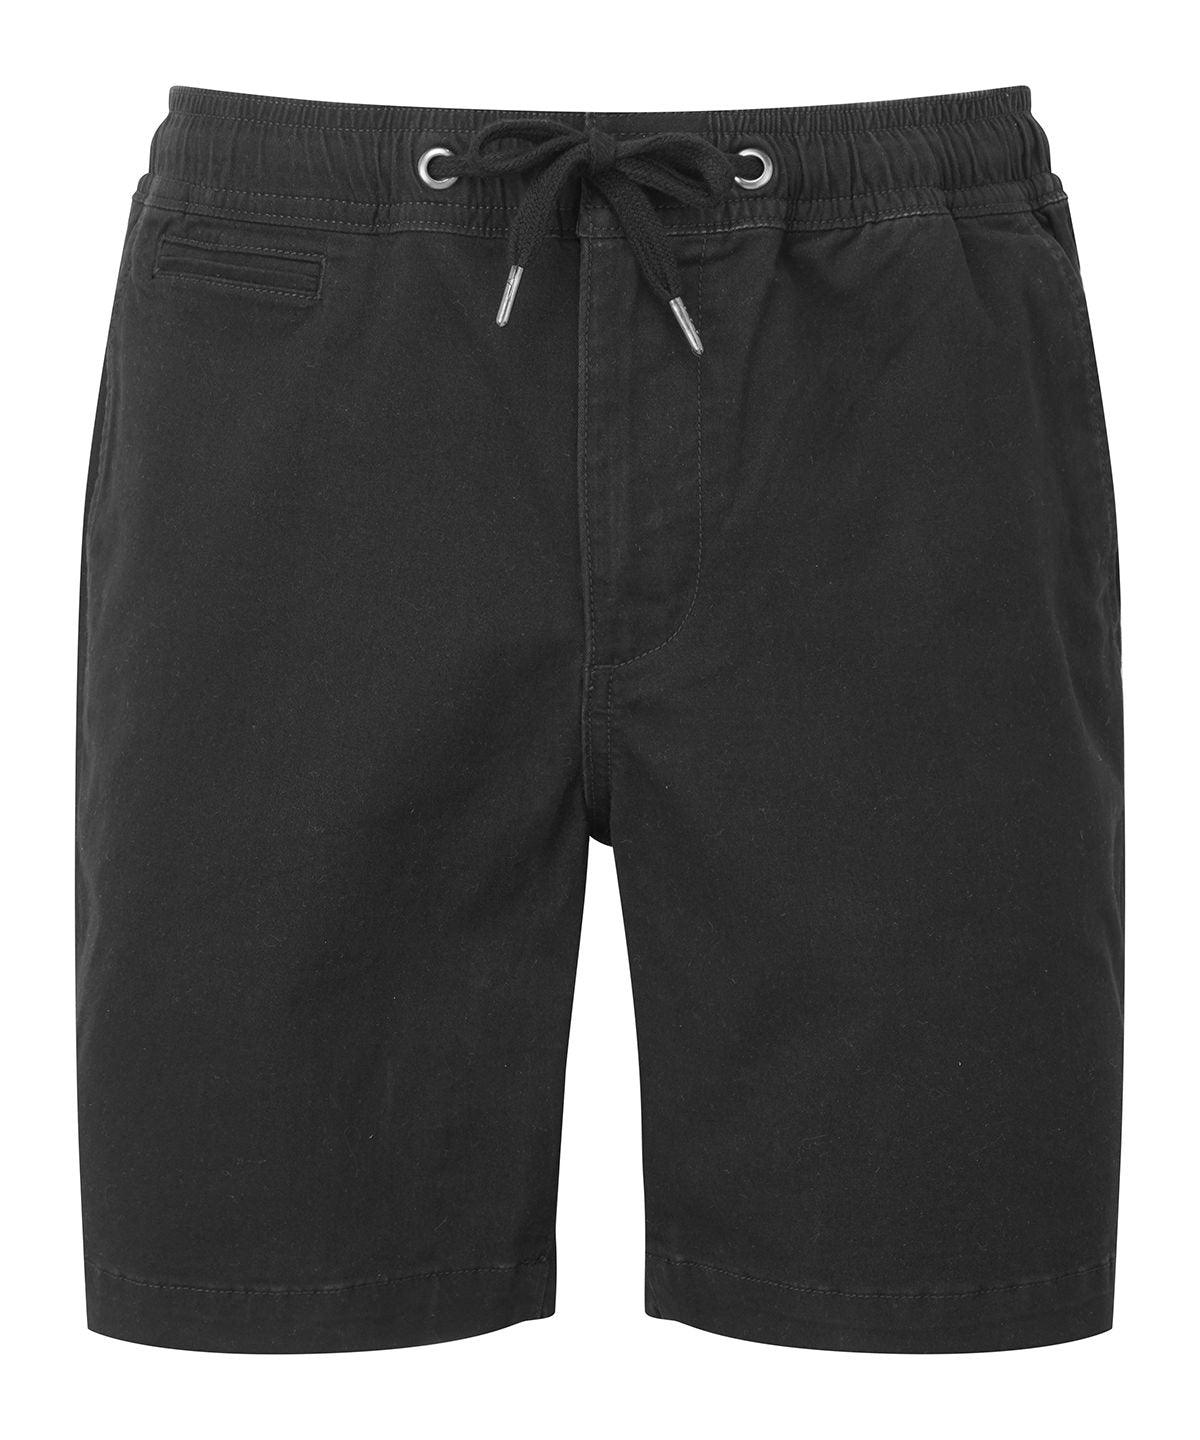 Black - Men’s drawstring chino shorts Shorts Wombat New Styles for 2023, Rebrandable, Trousers & Shorts Schoolwear Centres